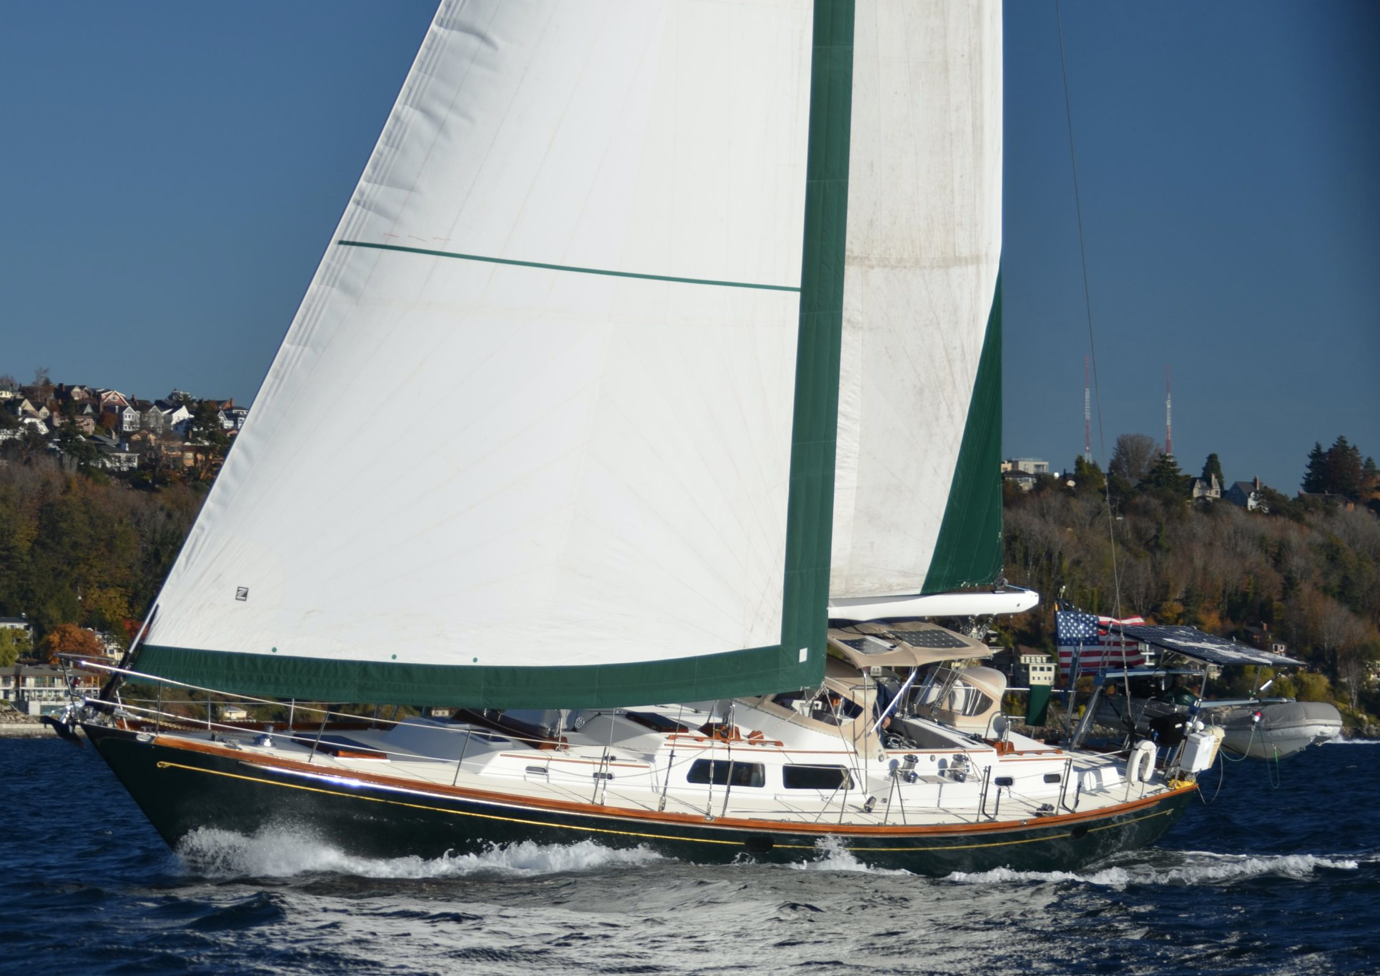 Seattle Yacht For Sale Swiftsure Yachts - Providing premium service to the customer buying or  selling a high quality yacht - Swiftsure Yachts